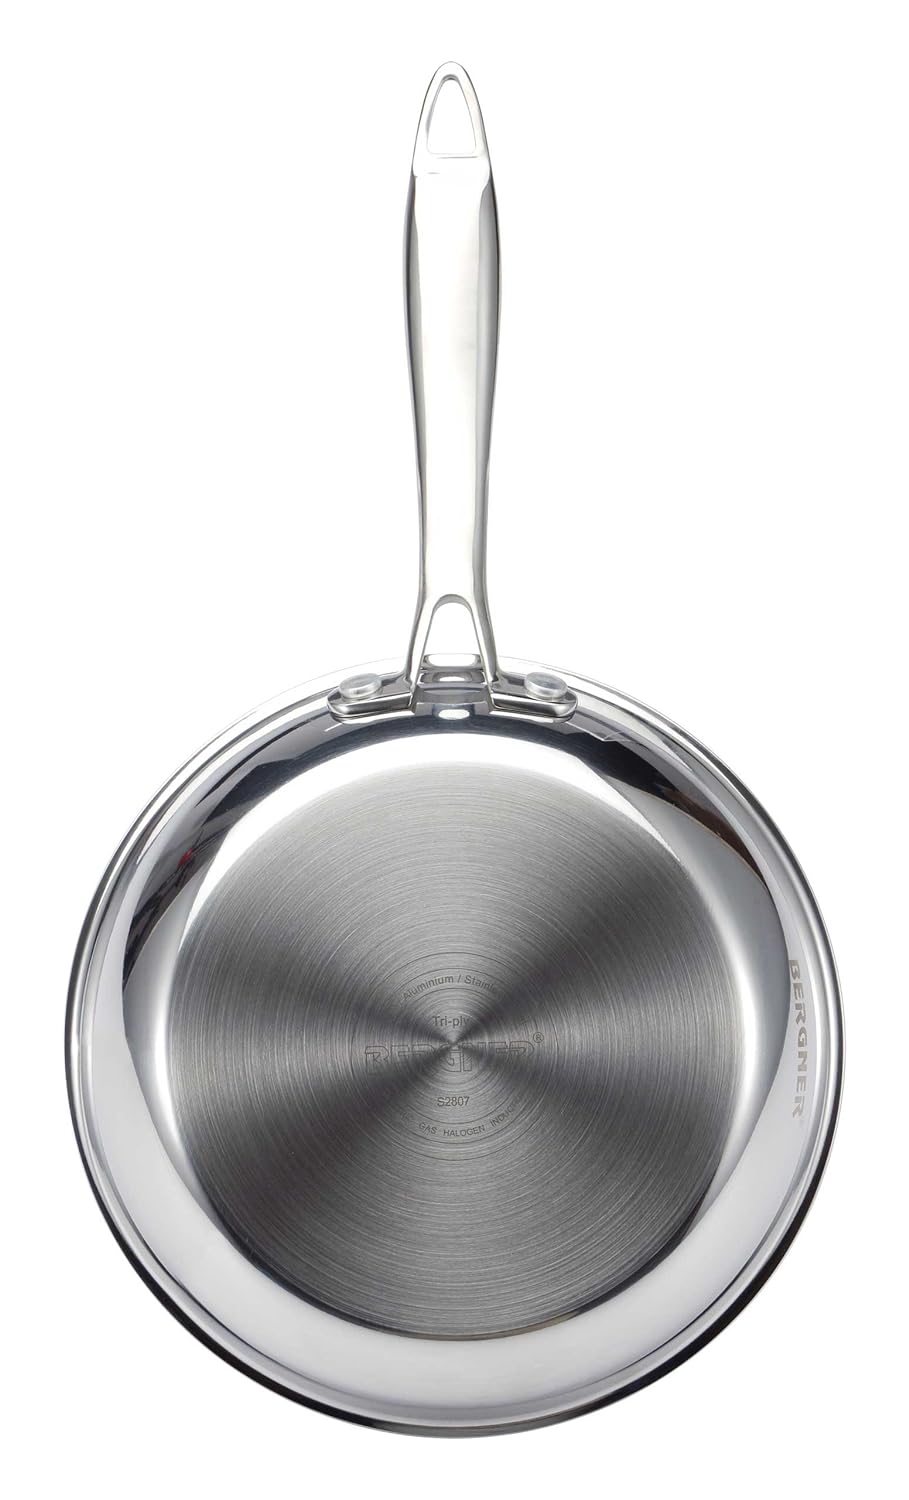 Bergner Argent TriPly Stainless Steel Fry Pan with Riveted Cast Handle & Induction Base (22 cm, Silver)